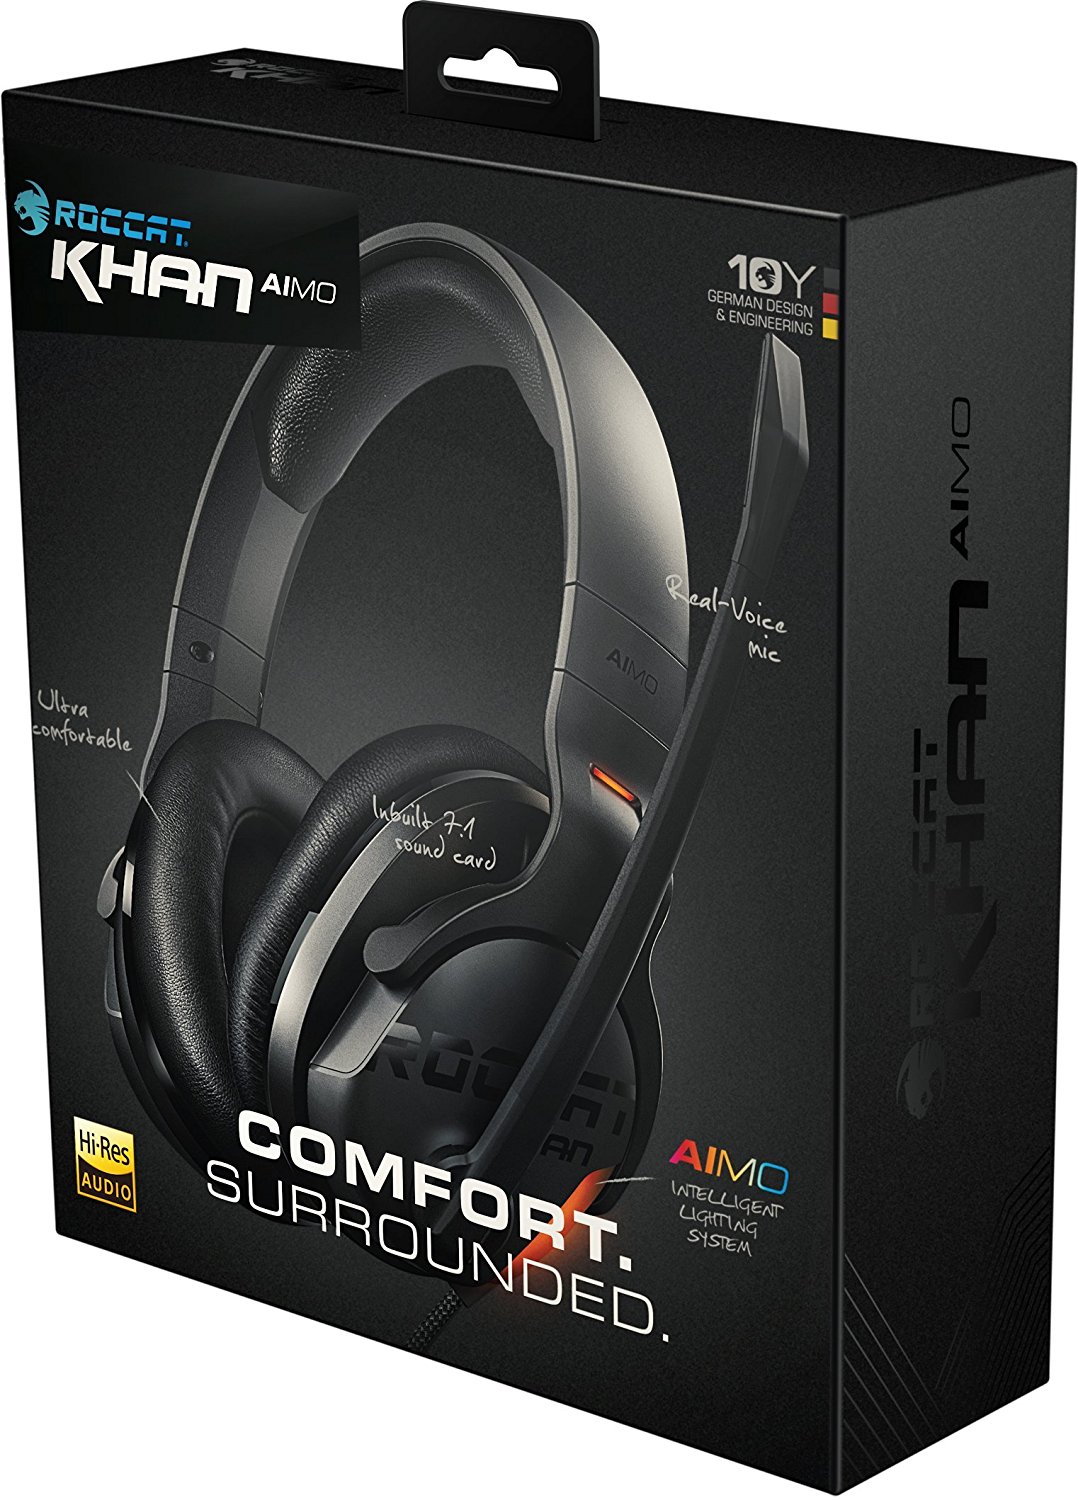 Casque gaming - Khan Aimo - Roccat®